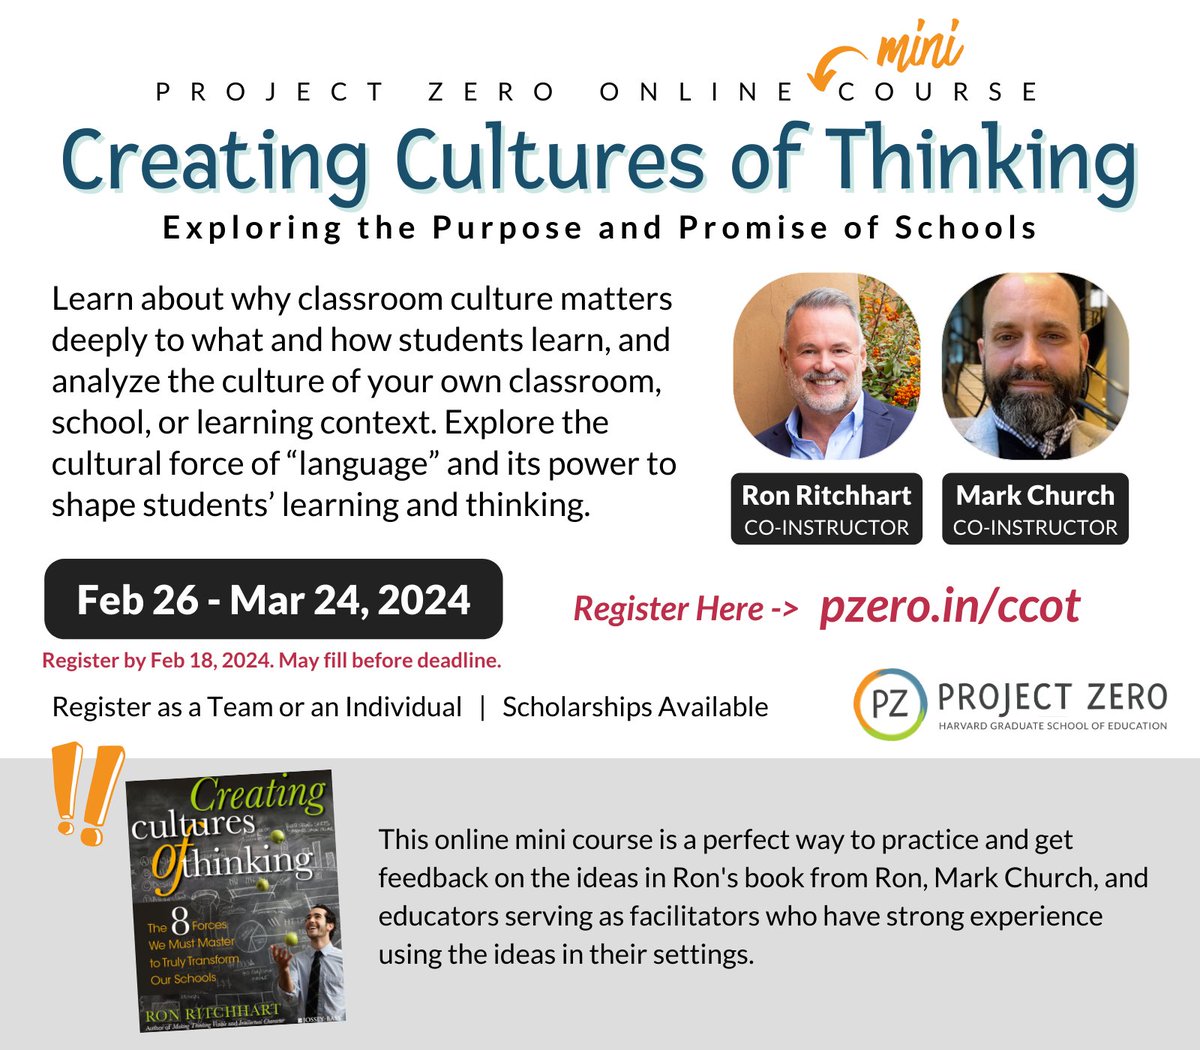 Join us next year for this 4 week introduction to #culturesofthinking. Register here: pz.harvard.edu/professional-d…